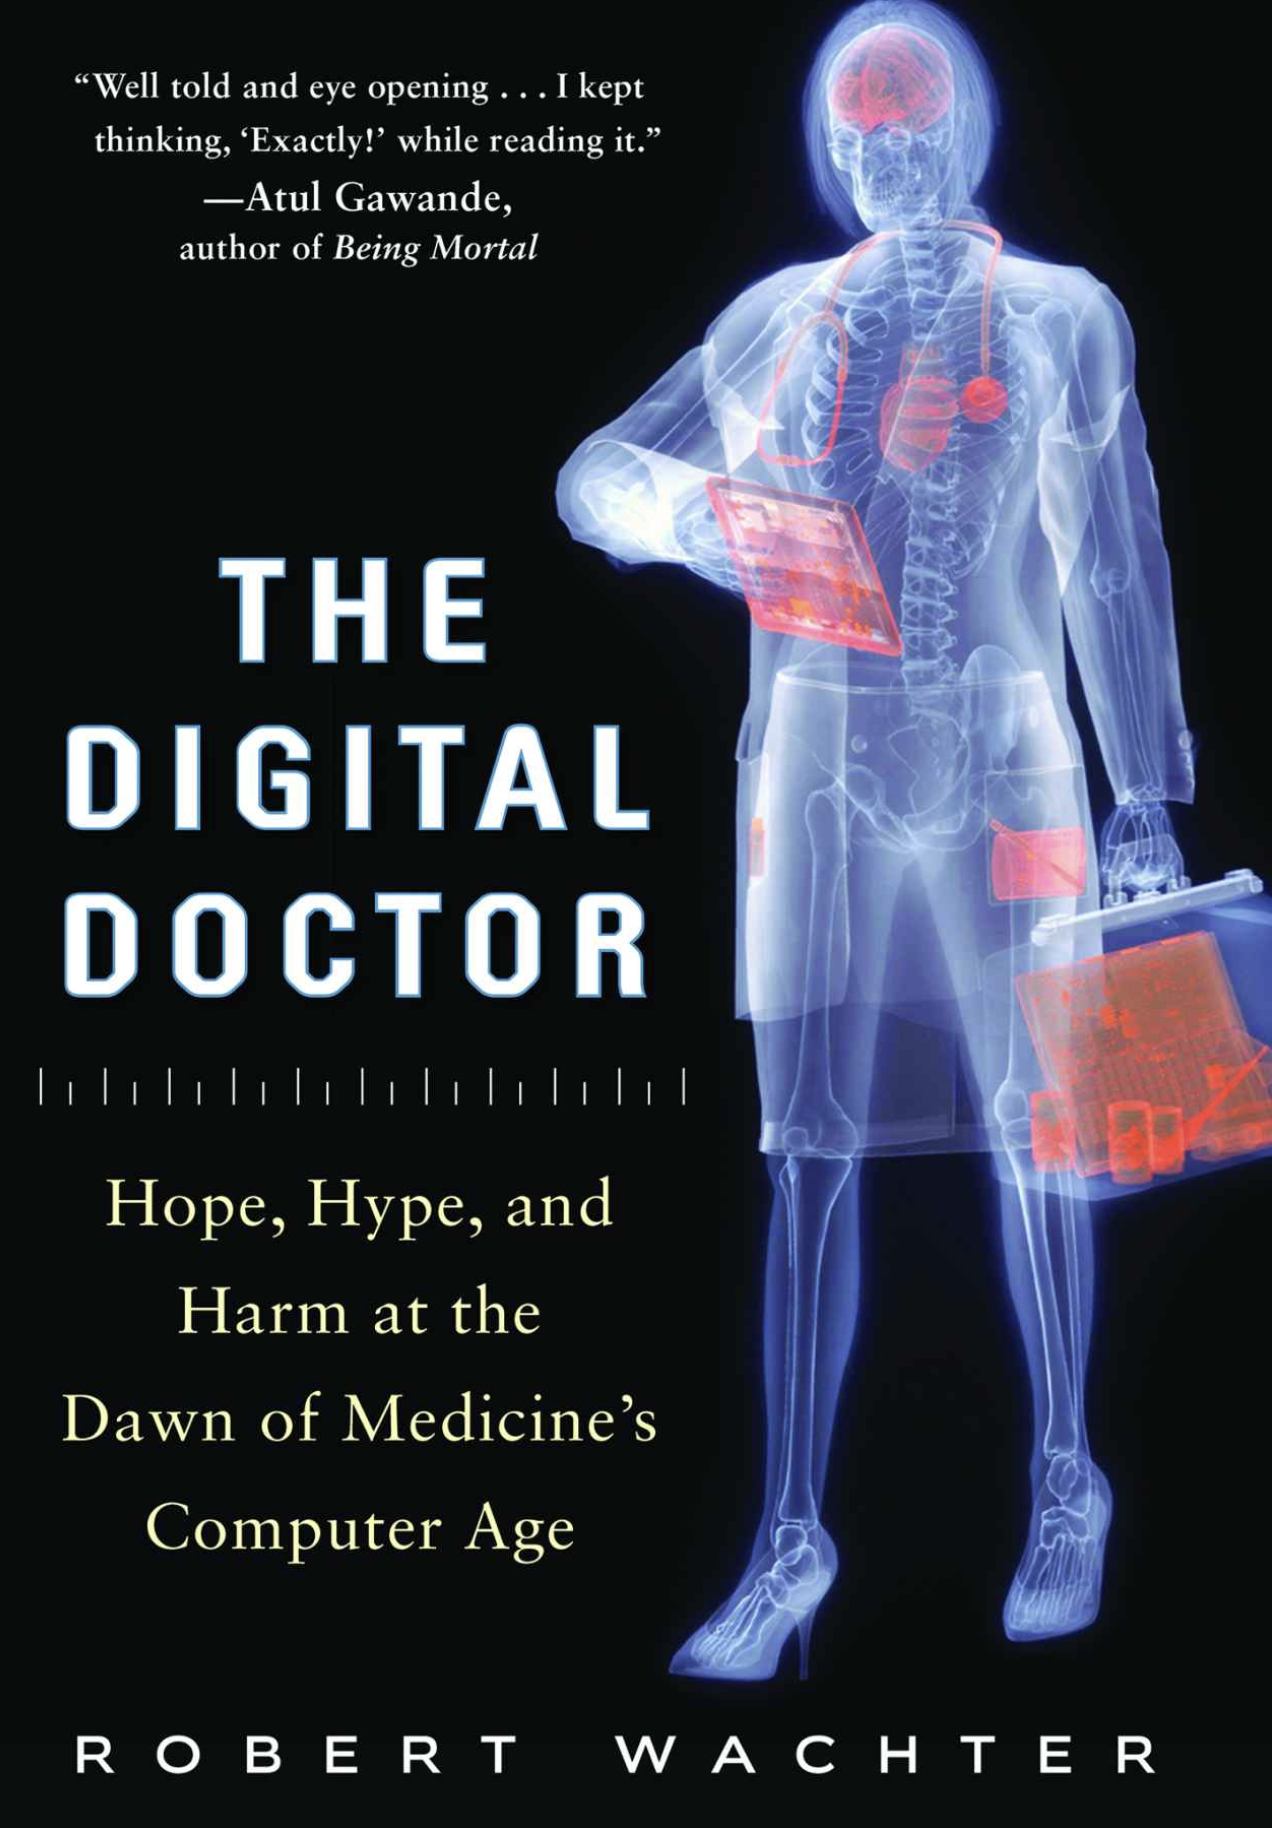 The Digital Doctor book cover